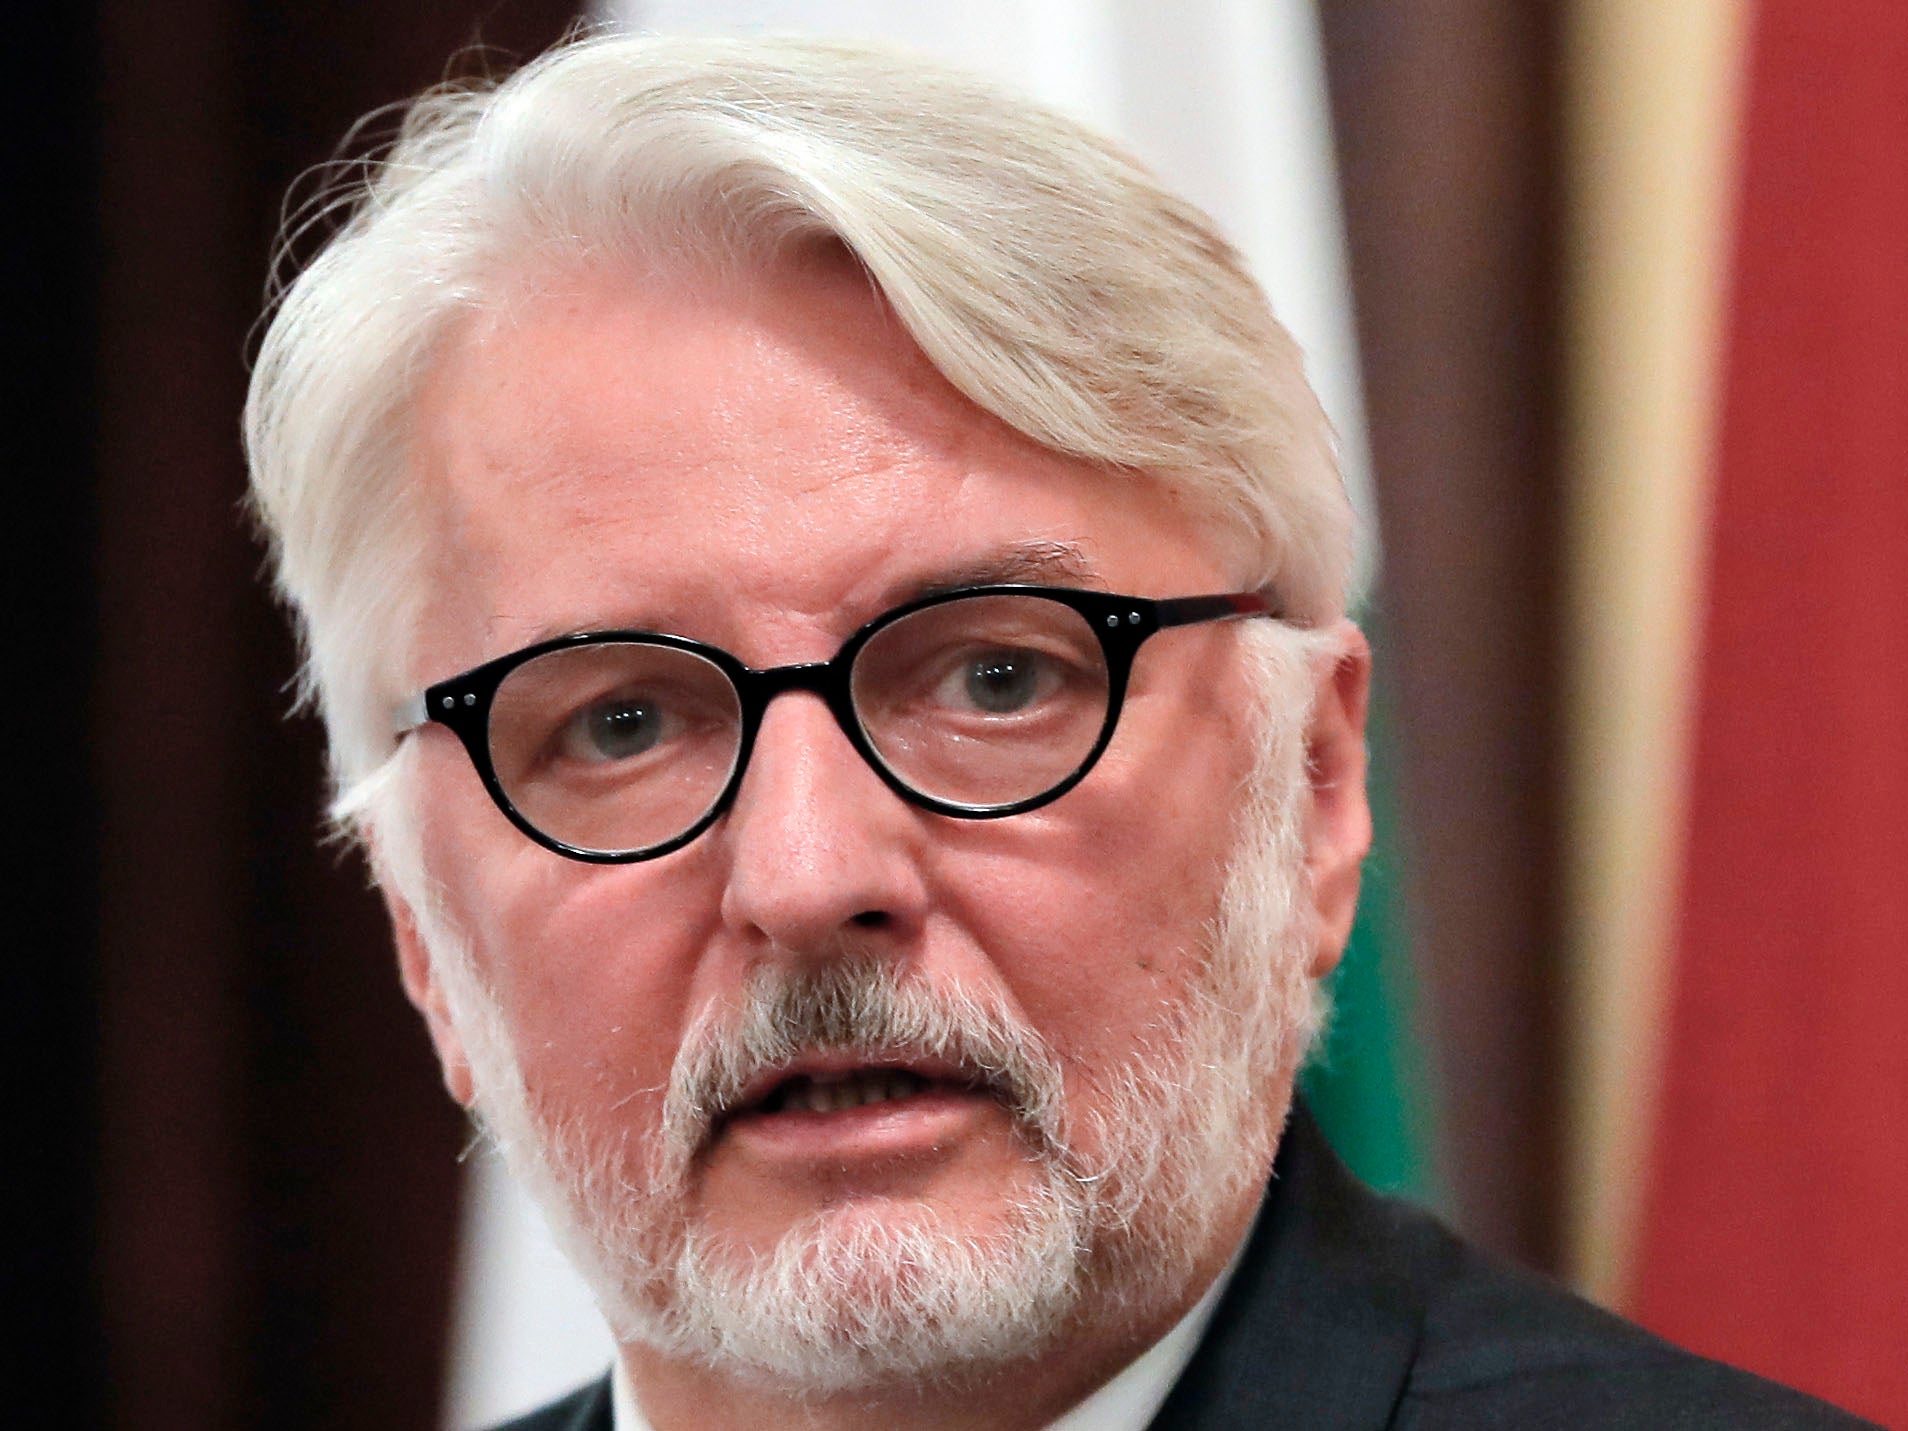 The Polish foreign minister been mocked on Twitter after he claimed to have met with the representative of a nonexistent country